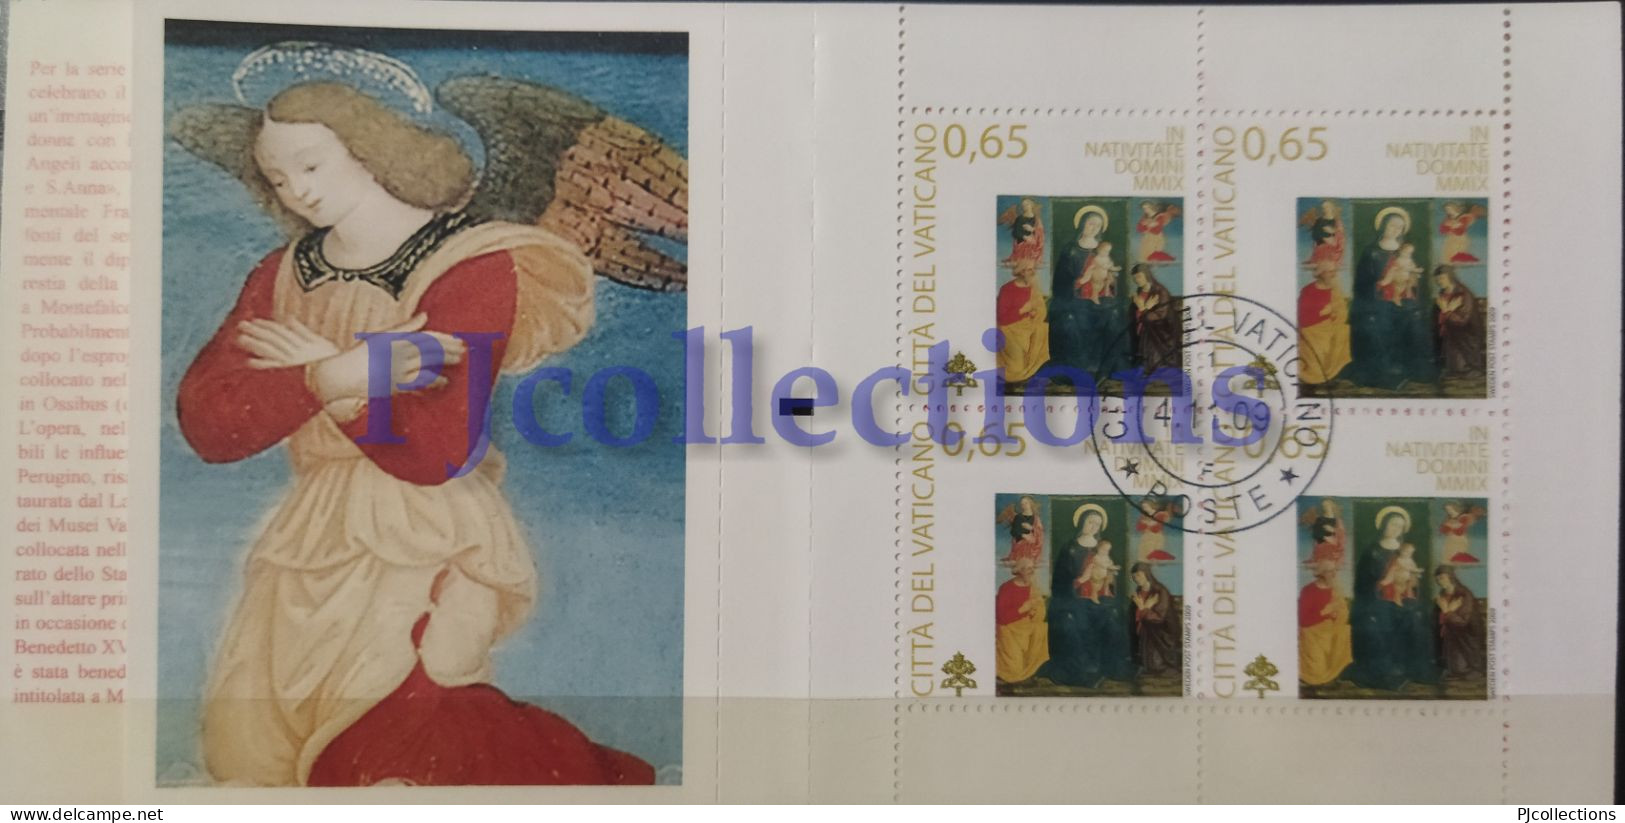 3764- VATICANO- VATICAN CITY 2009 NATALE - CHRISTMAS FULL BOOKLET 4 STAMPS C/ANNULLO 1° GIORNO - USED - Usados